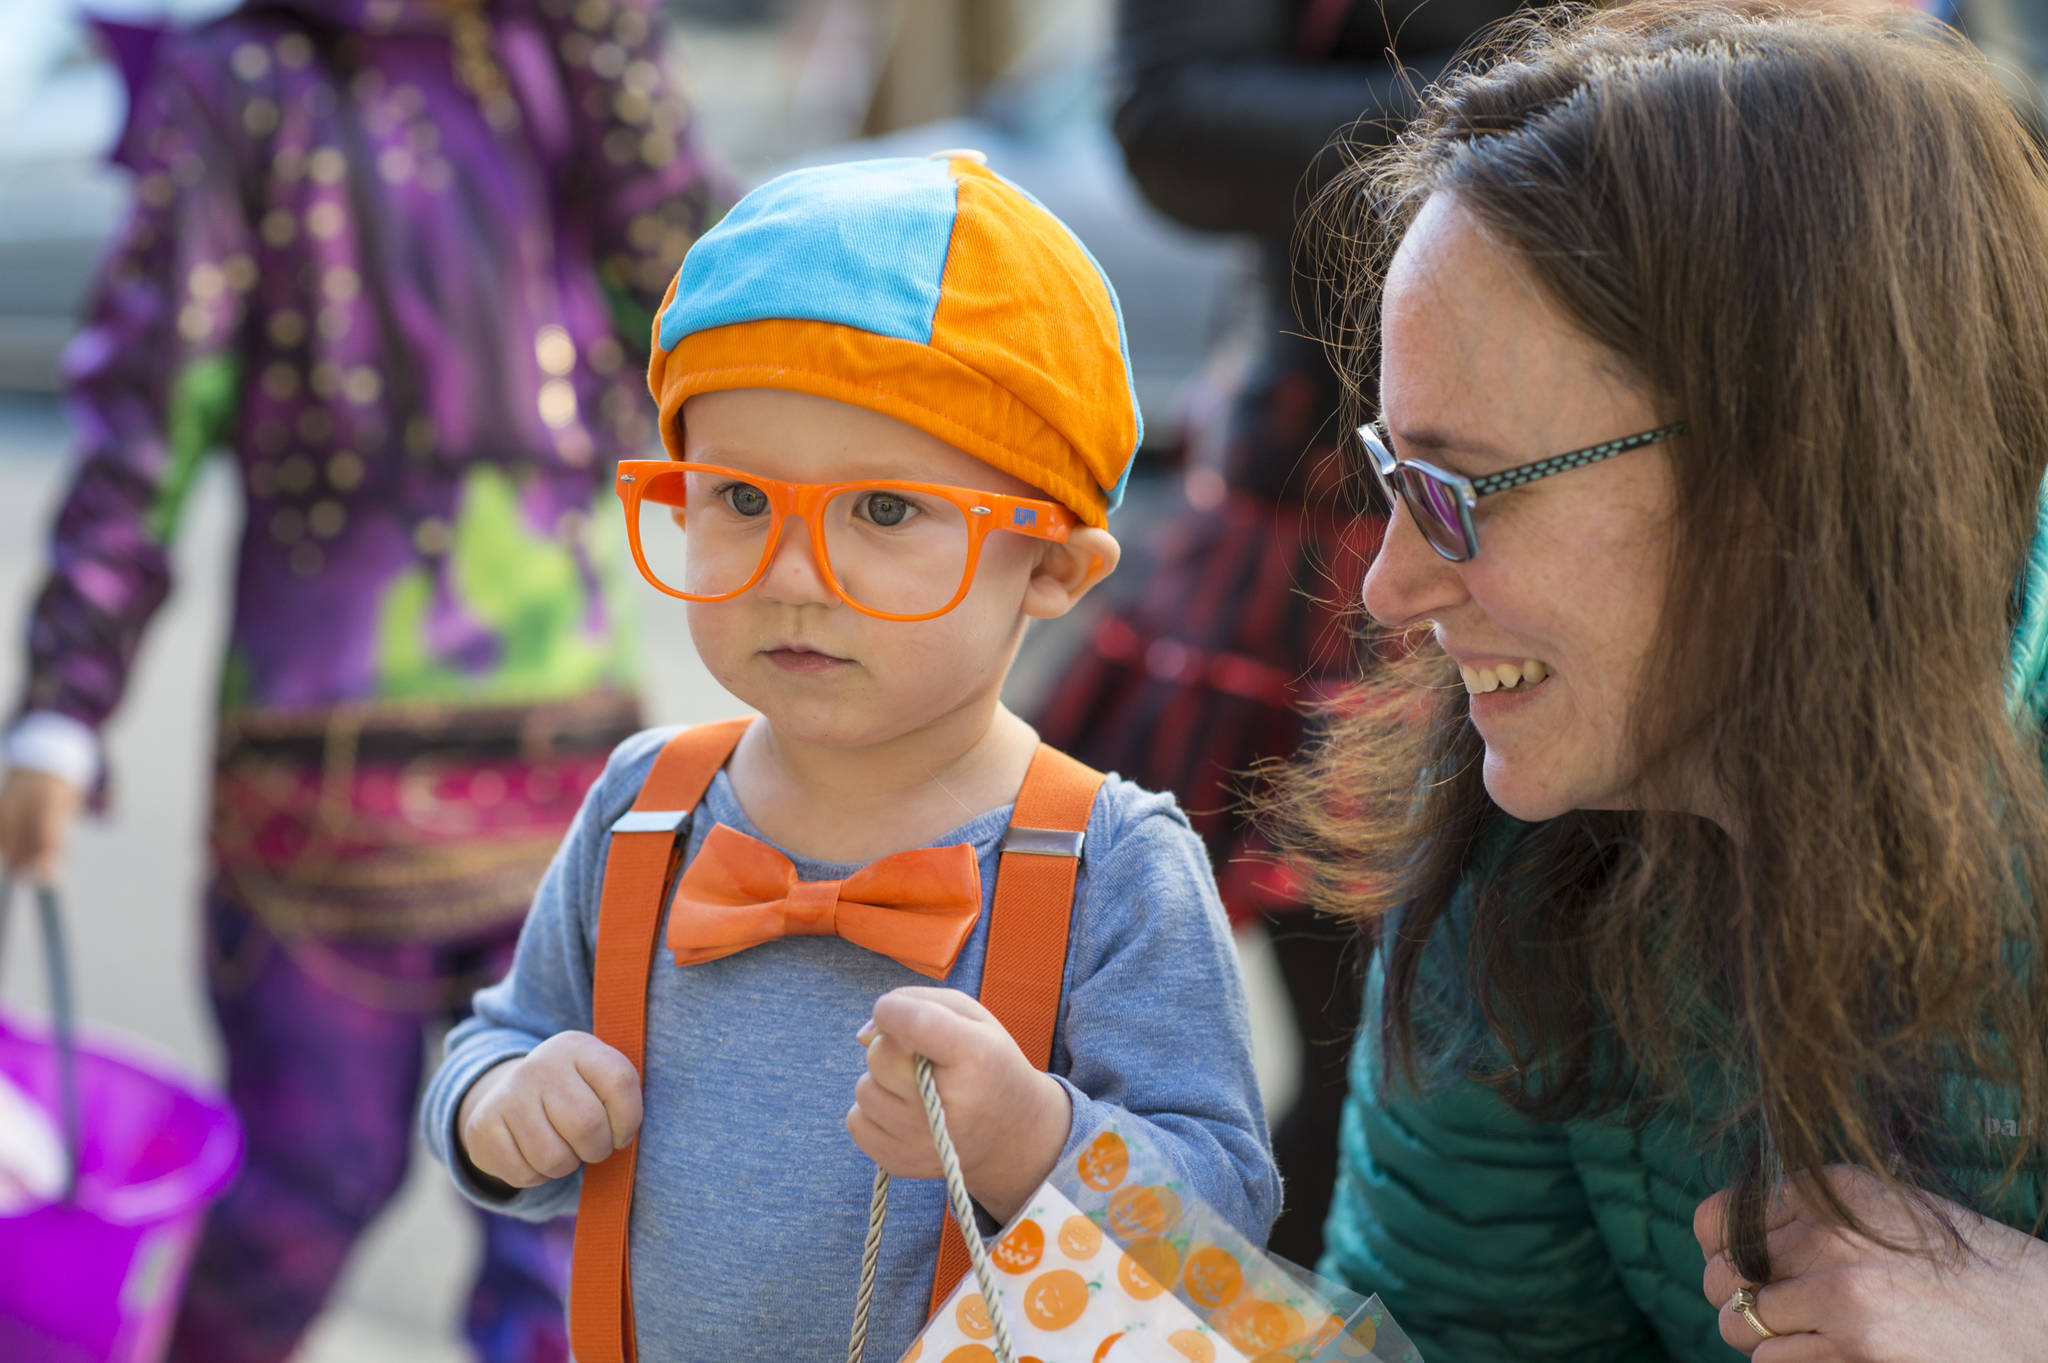 Leah Heiman watches her son, Evan, 2, as they visit downtown merchants for Halloween on Wednesday, Oct. 31, 2018. For the fourth year Kindred Post has organized the Halloween celebration for trick-or-treaters. (Michael Penn | Juneau Empire)